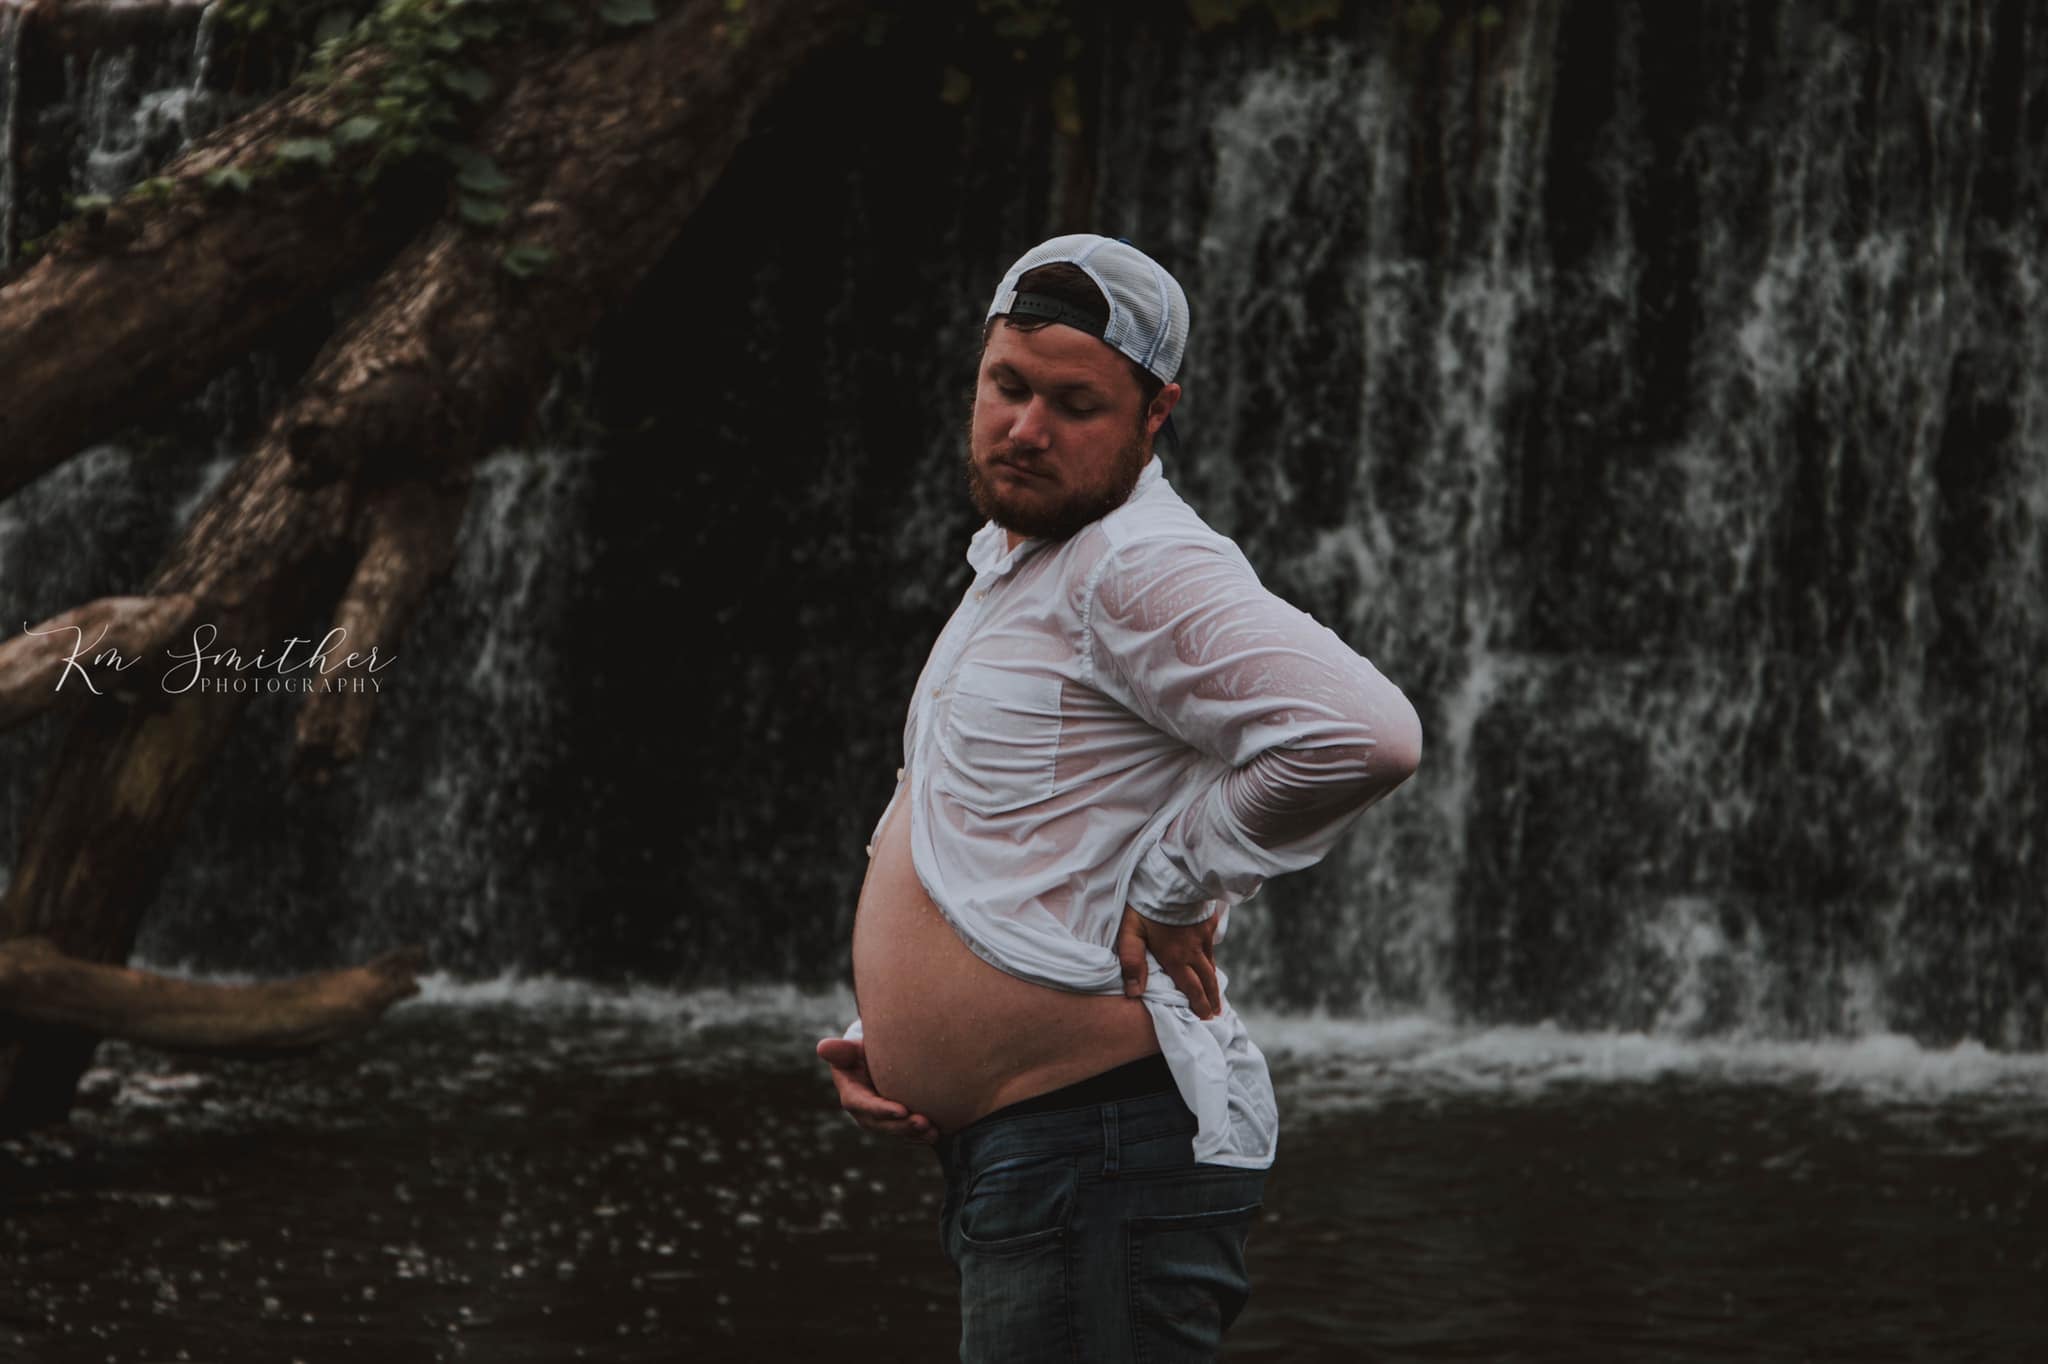 25+ Maternity Photoshoot Poses in 2023